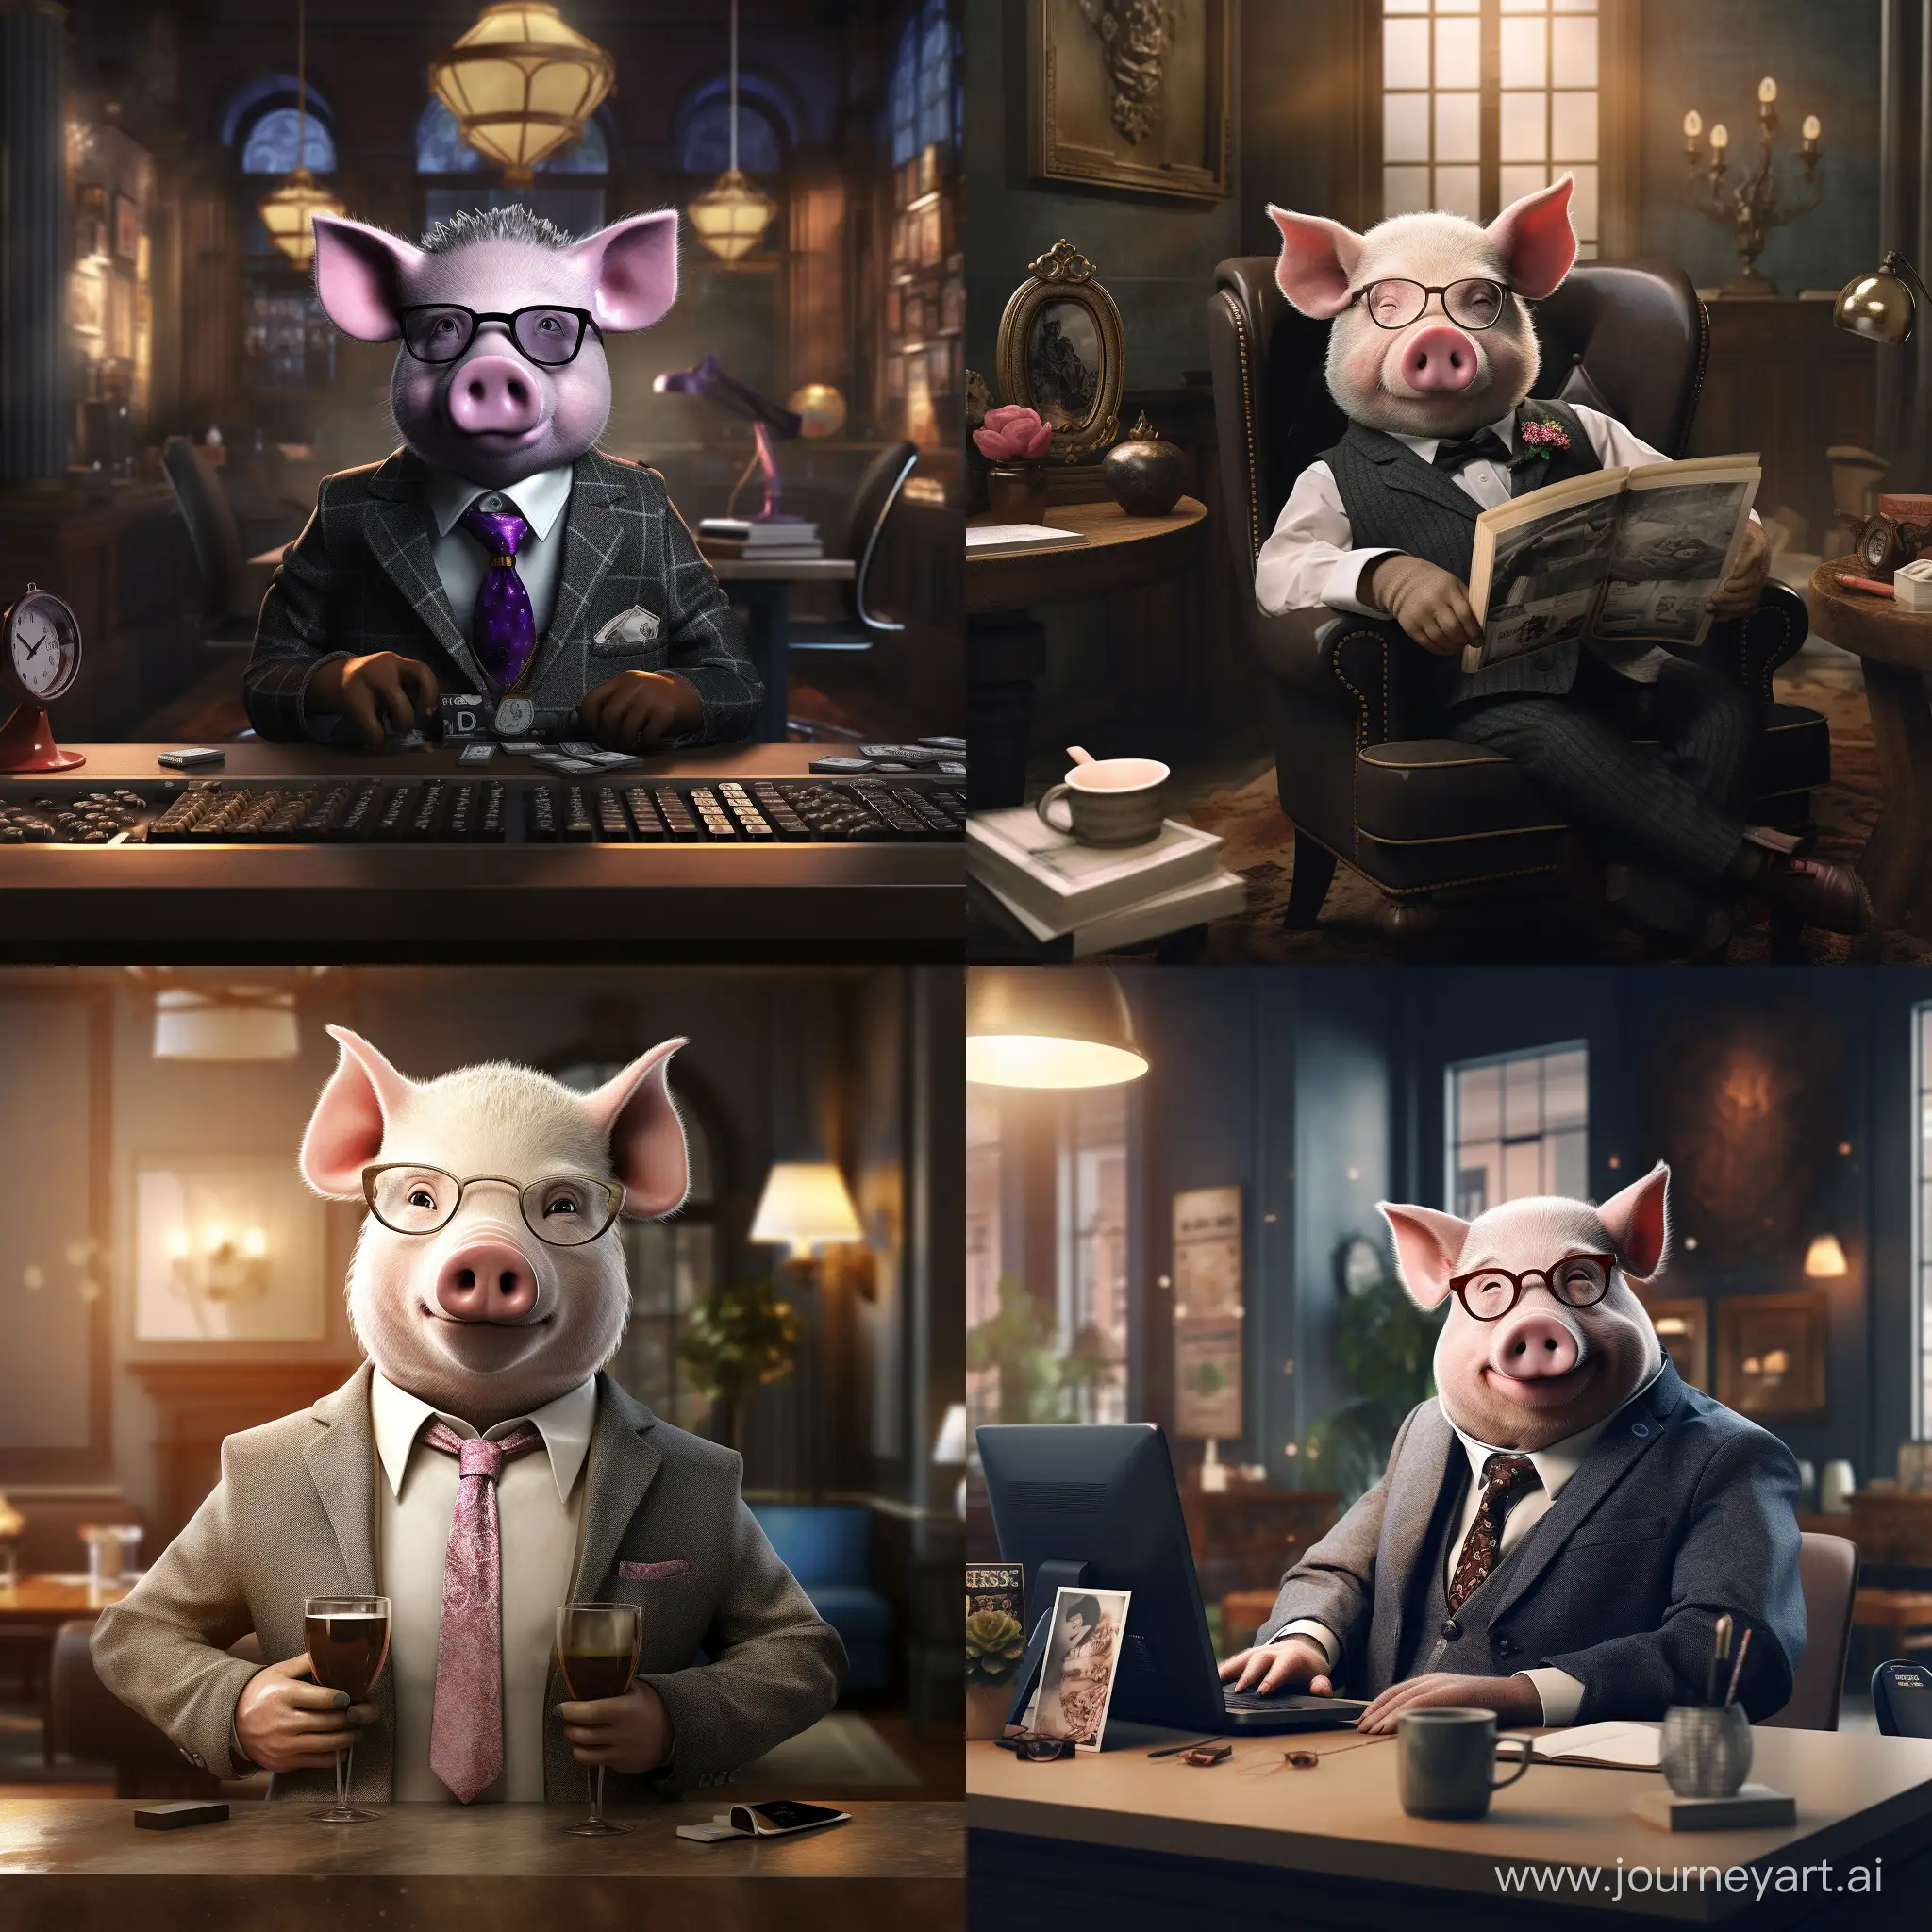 create an image or me for a bank called piggy